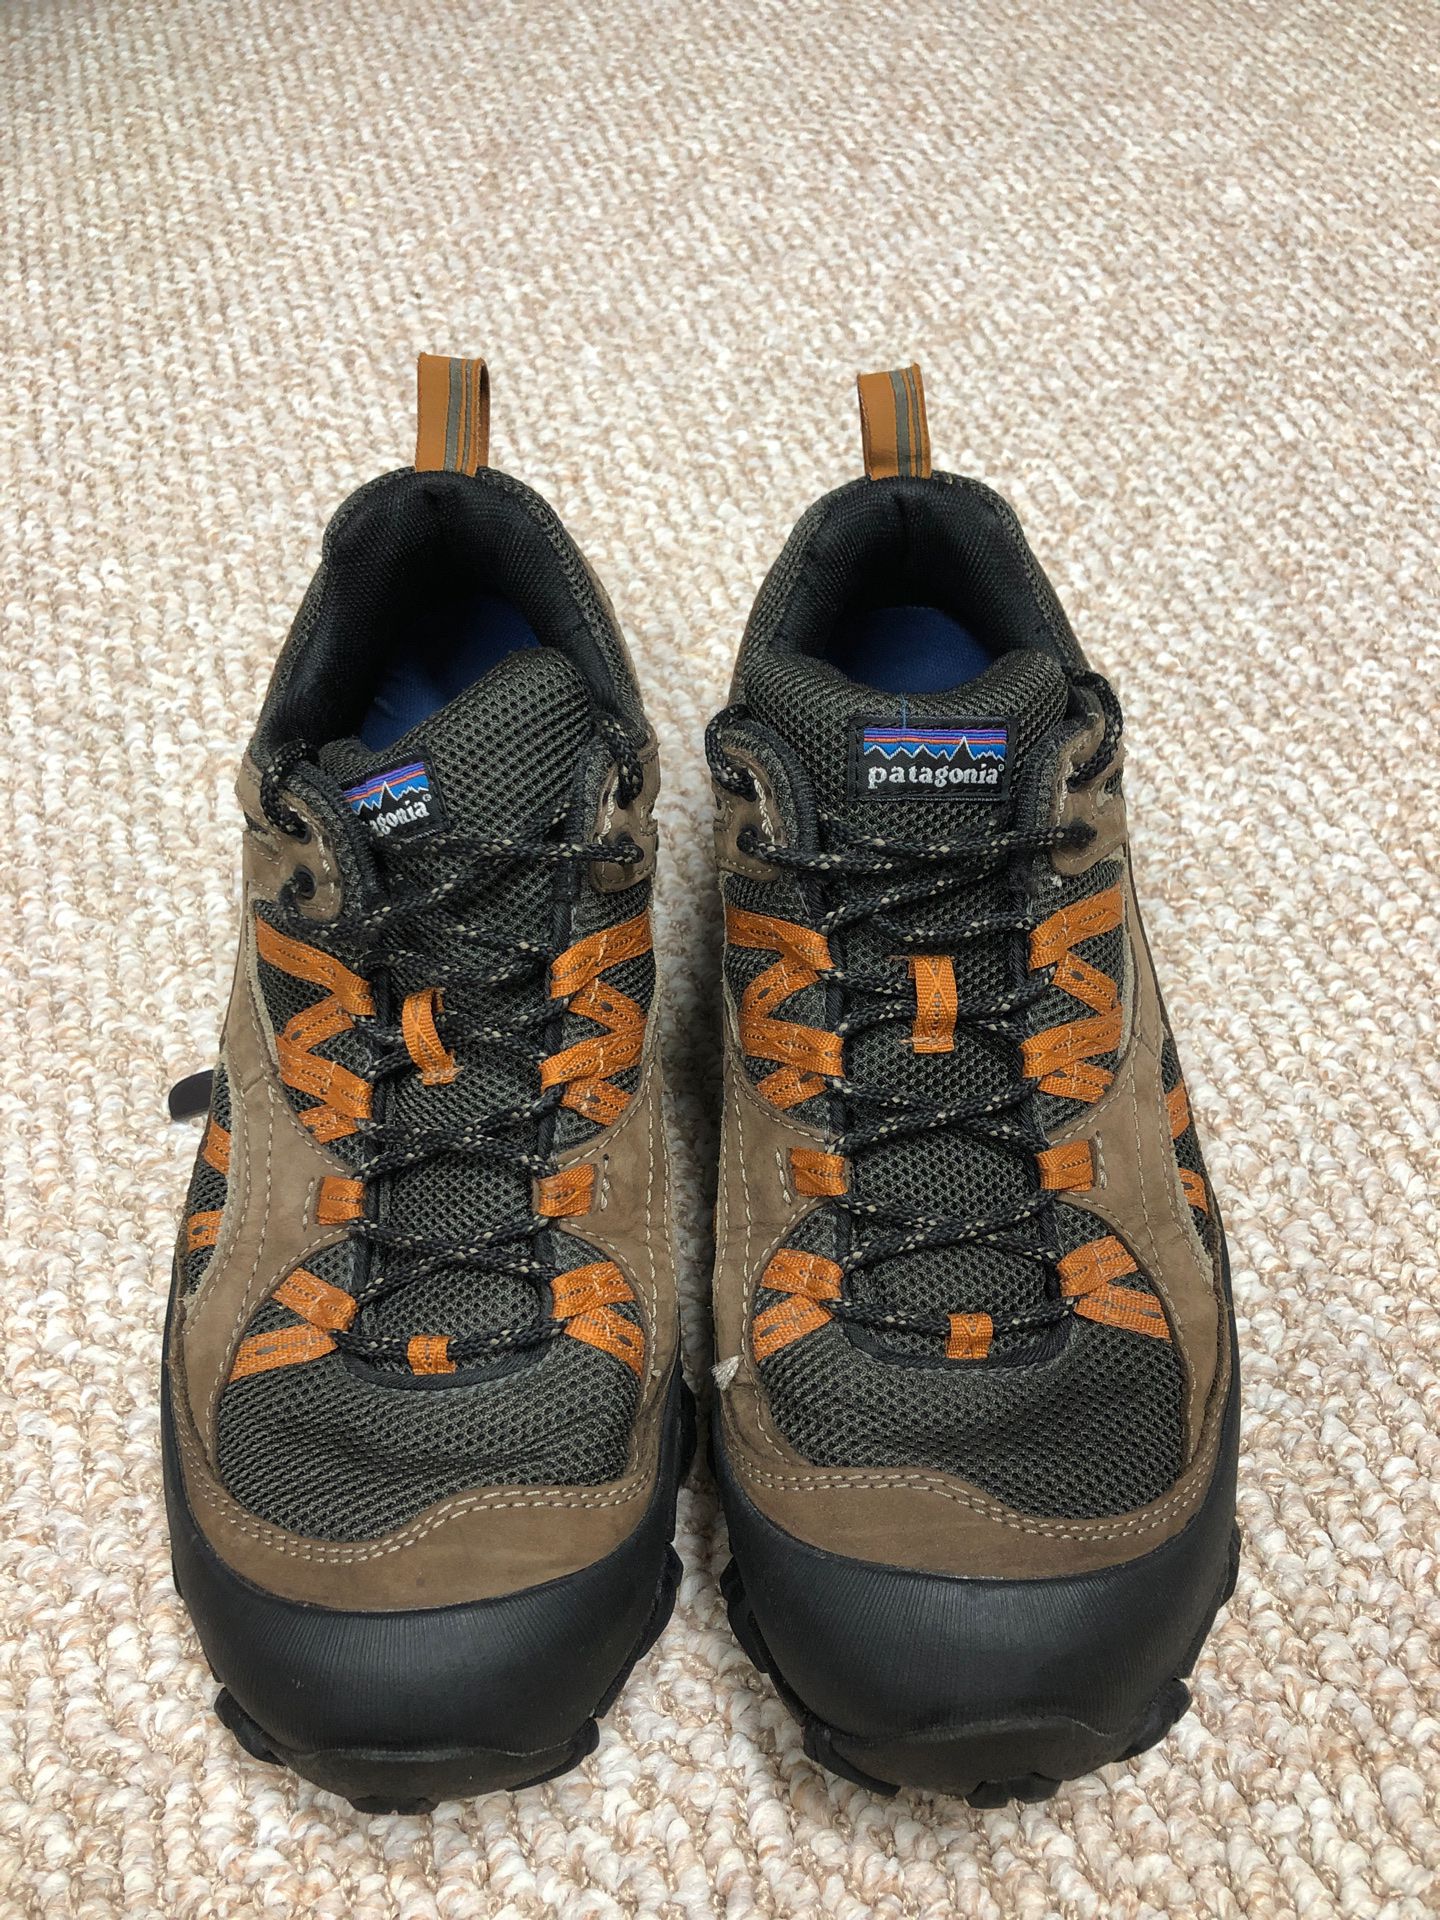 Mens Patagonia Drifter A/C Hiking Boot size 11